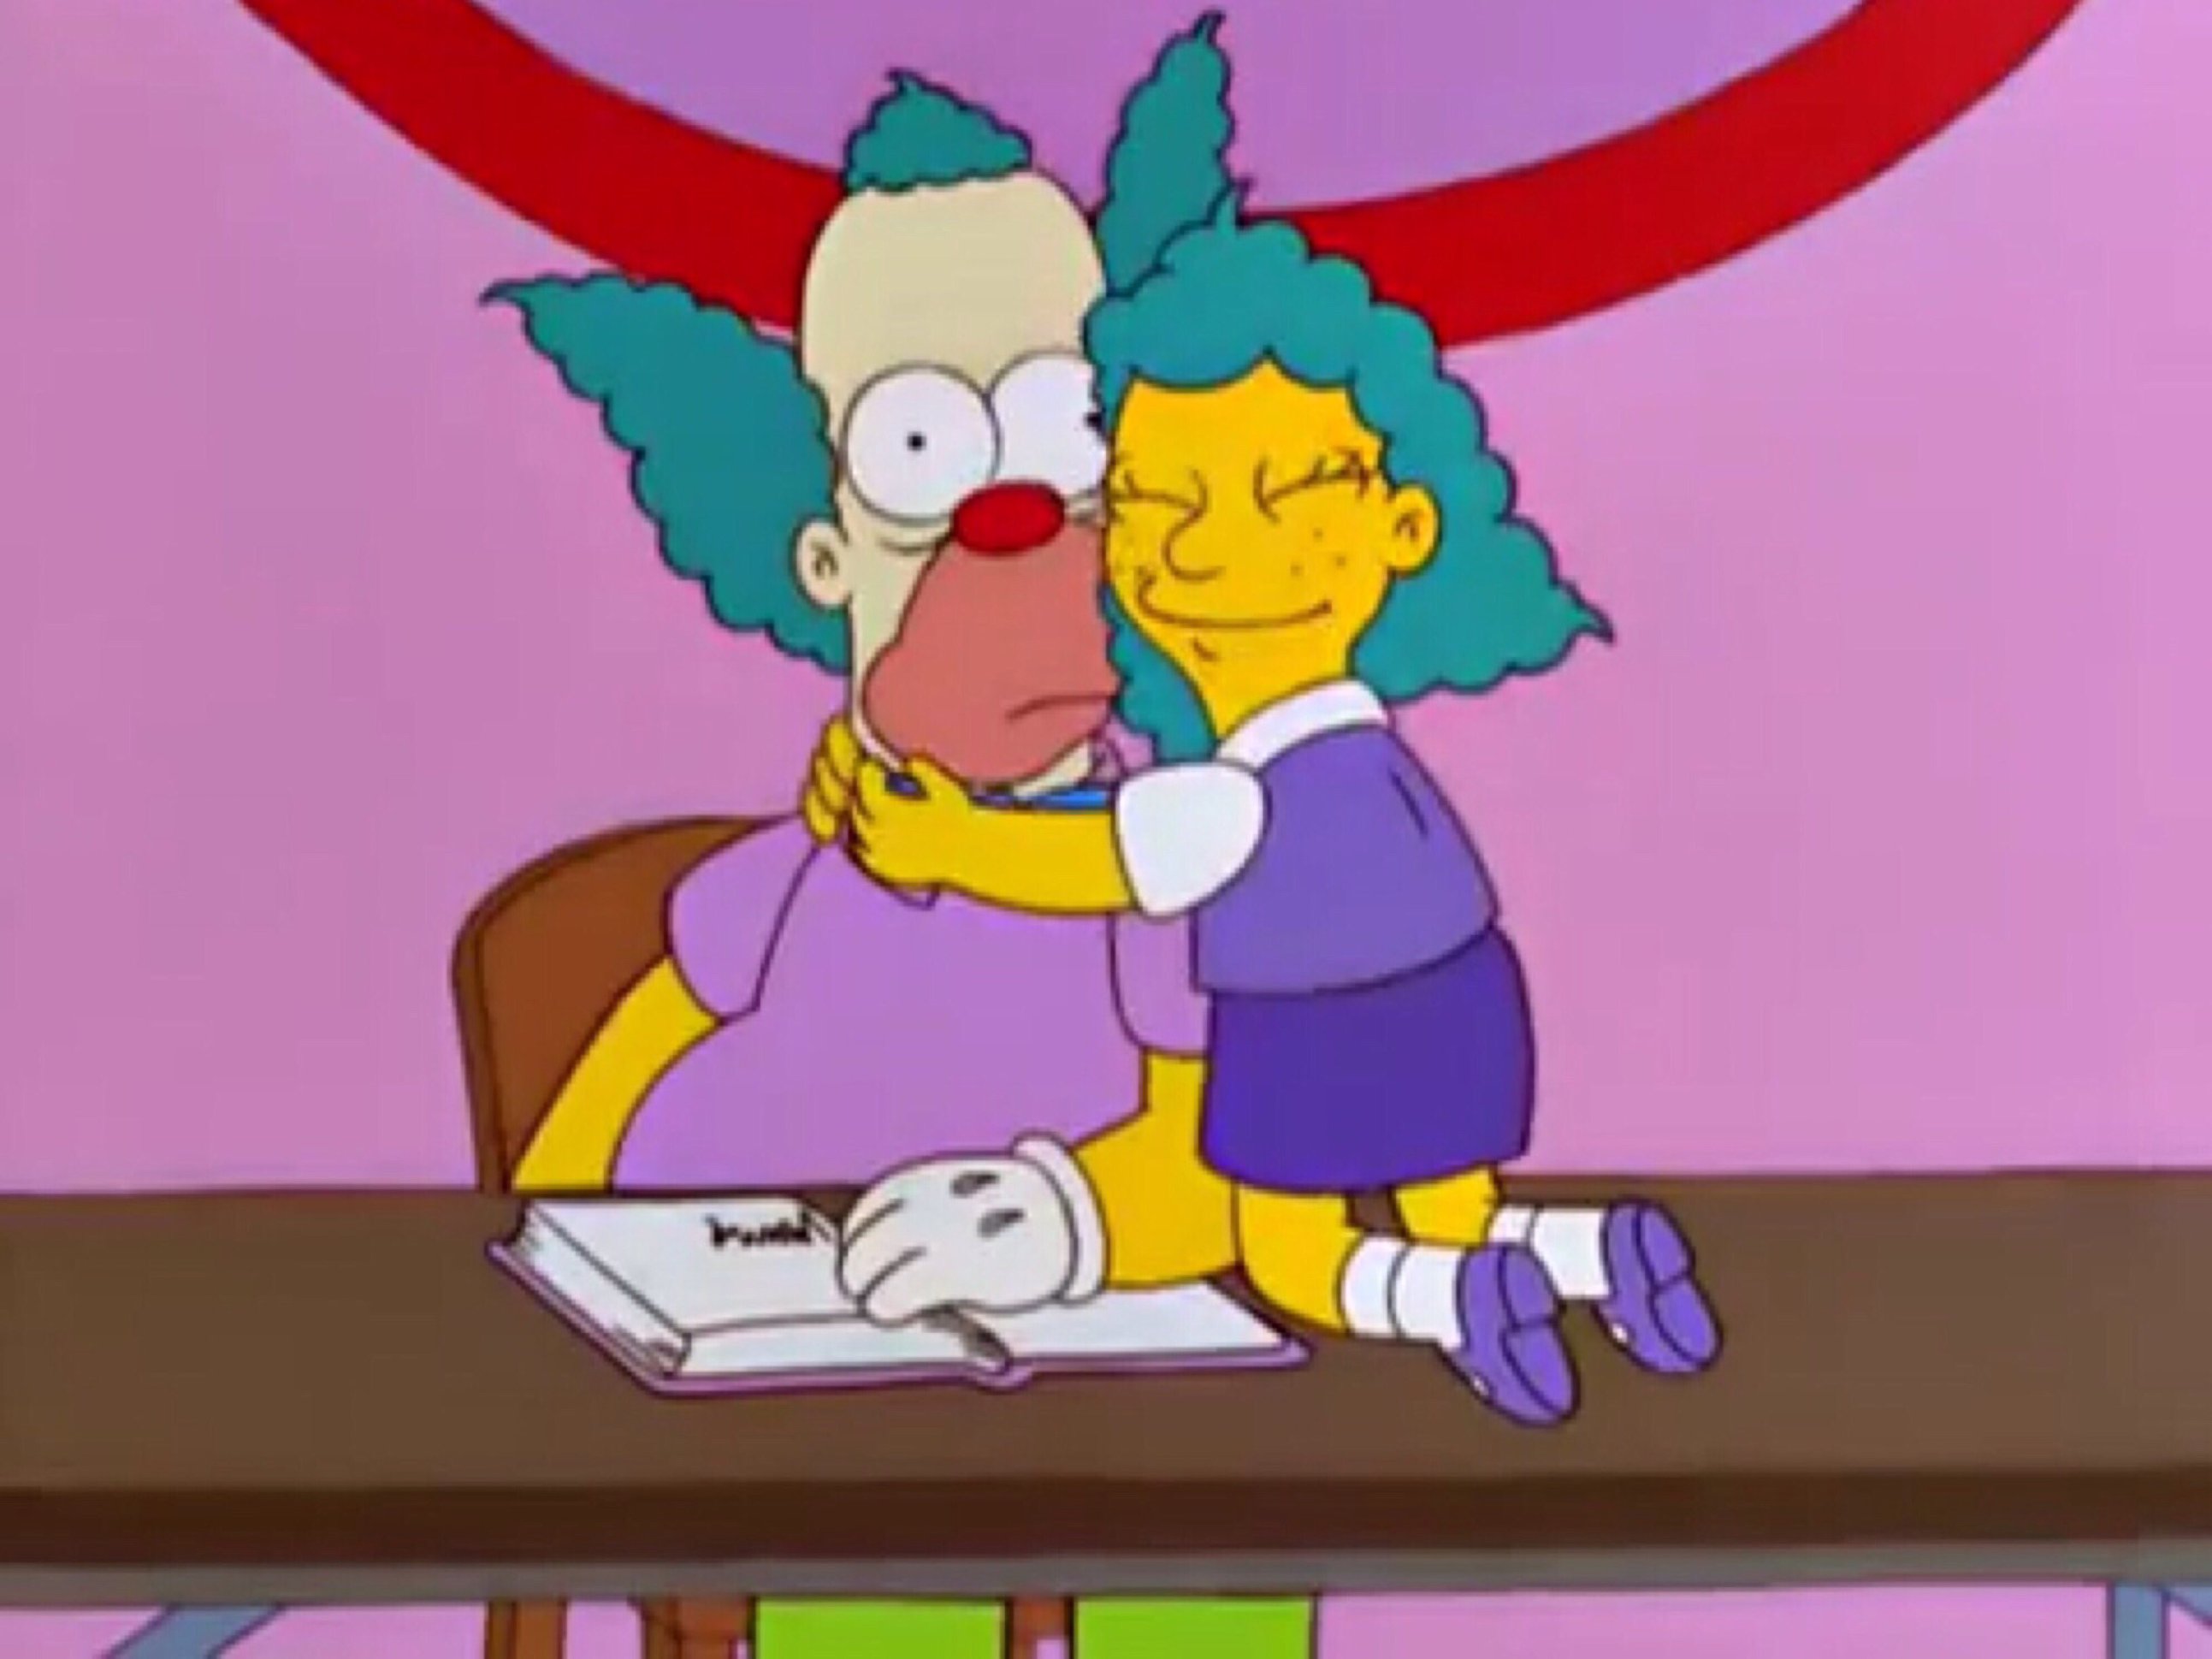 lol that is totally me in that picture lol). krusty the clown! 